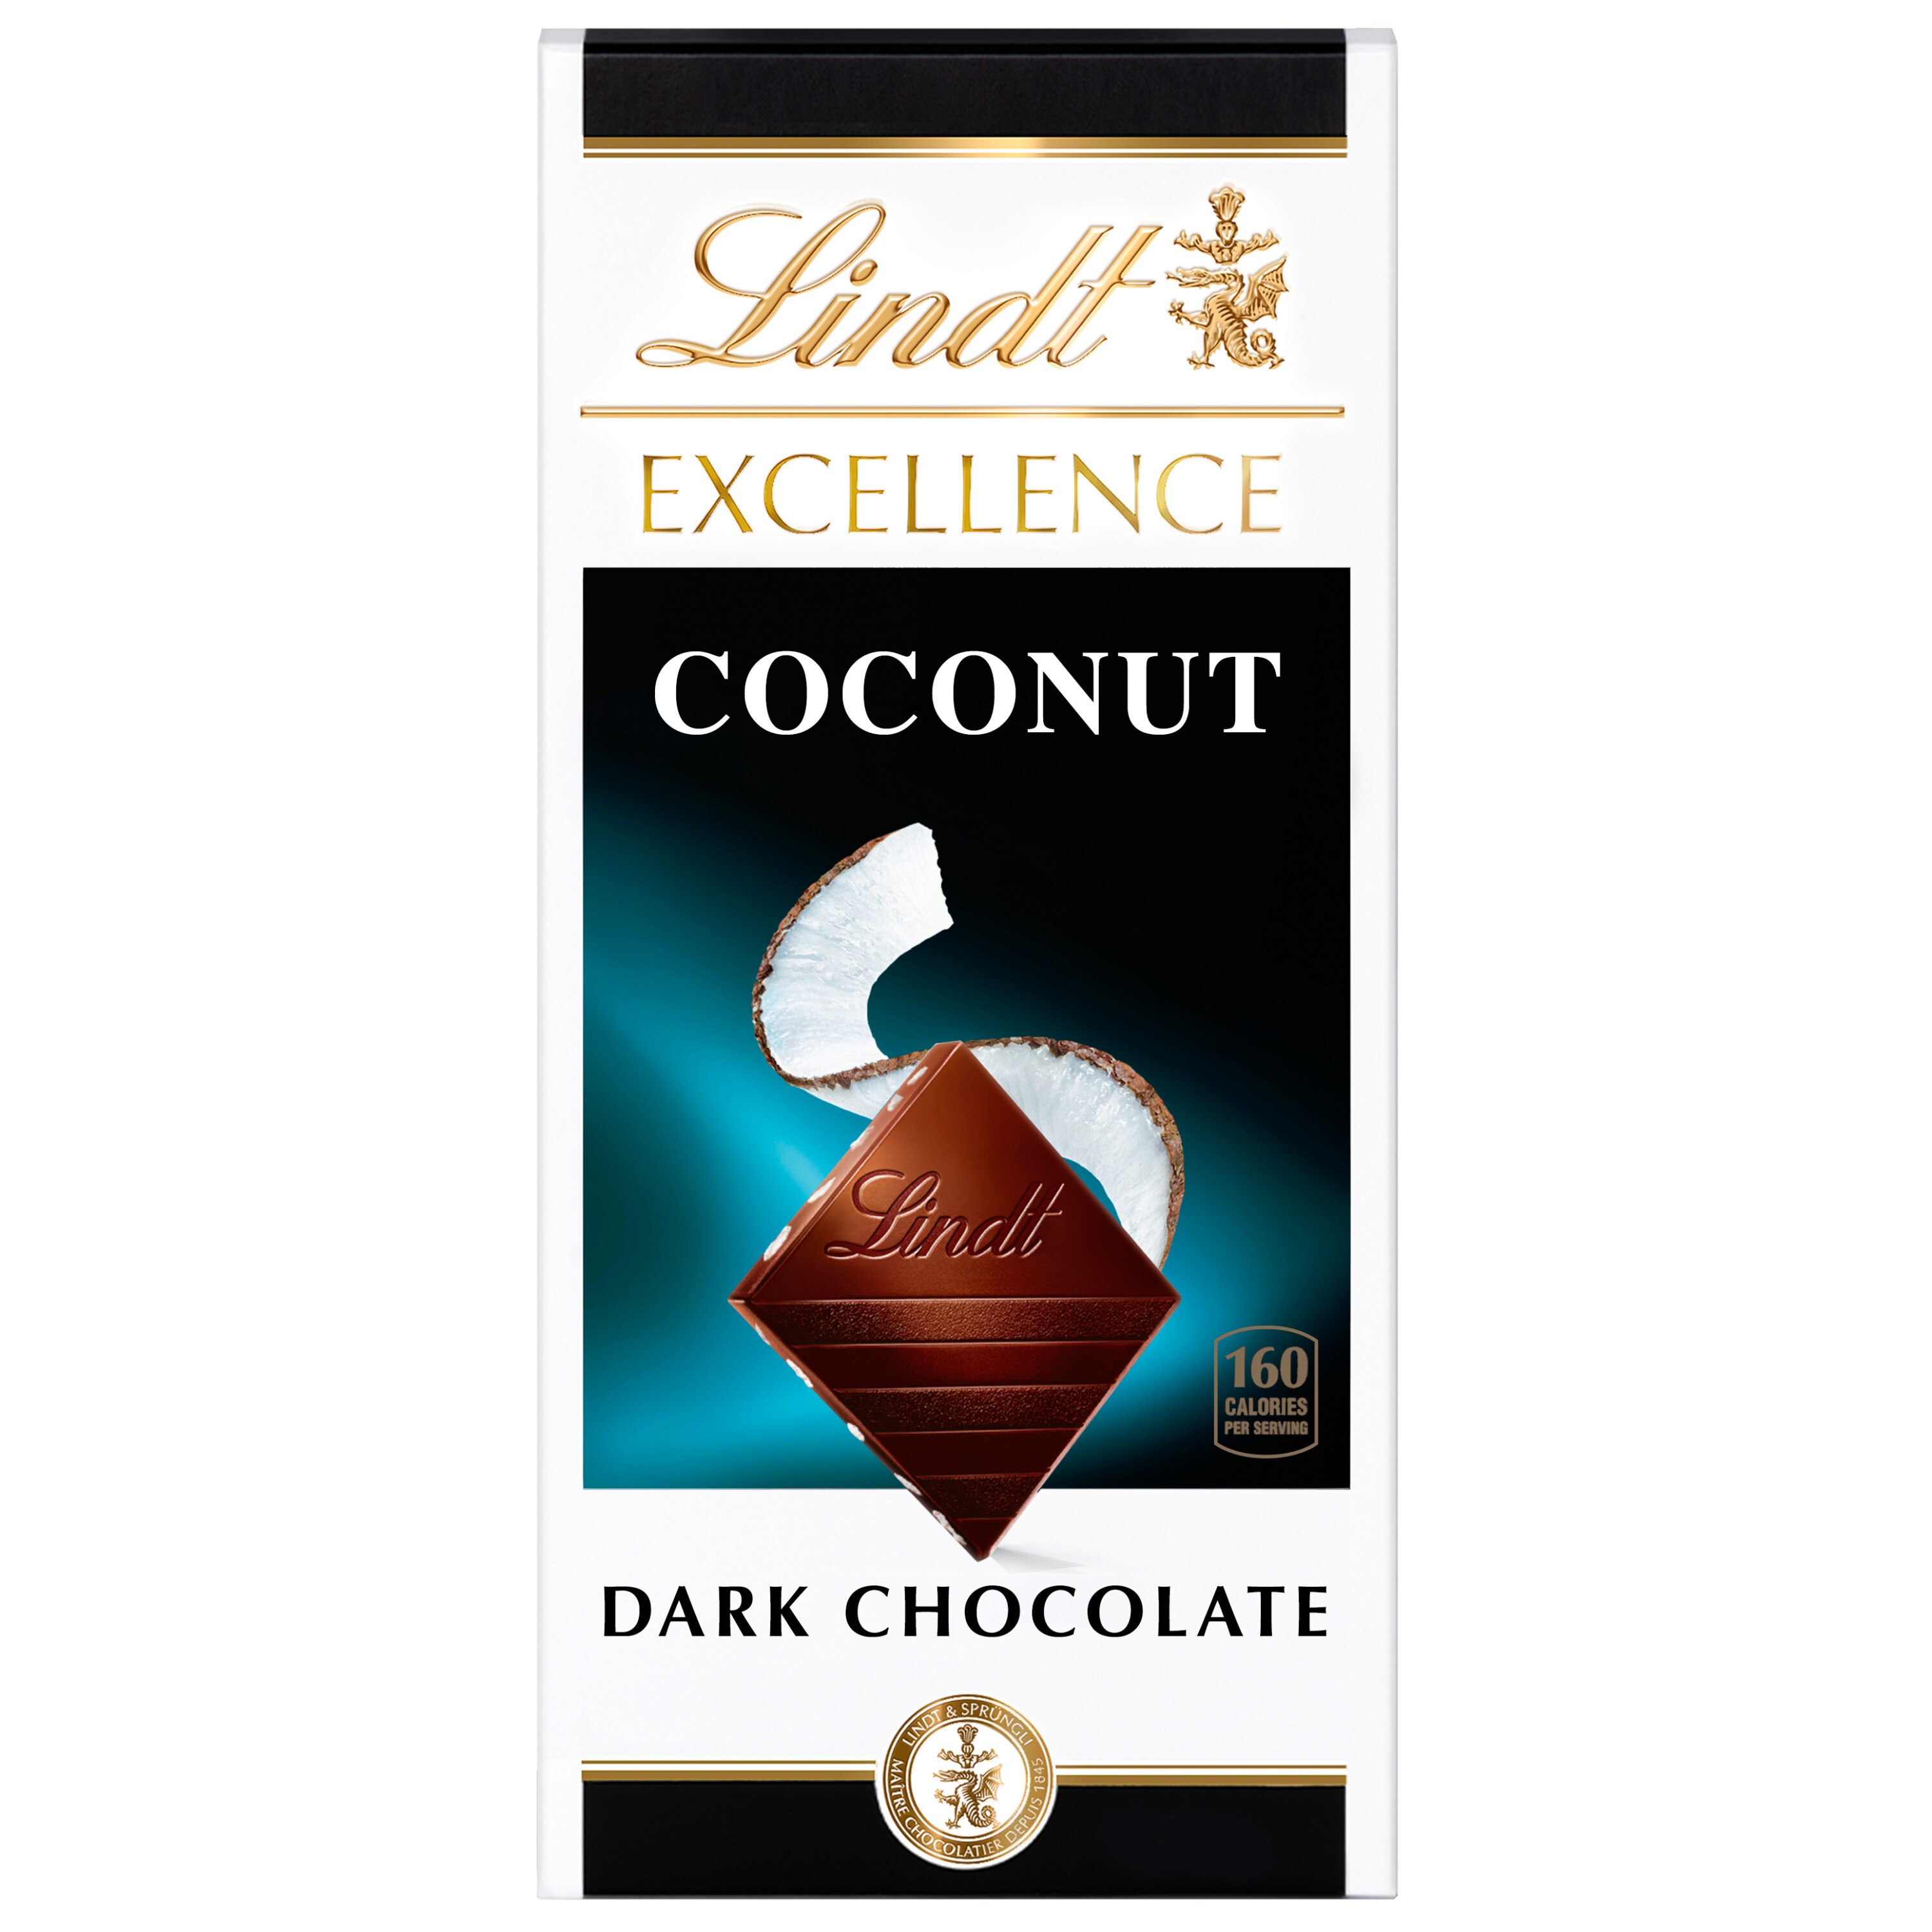 Lindt Excellence Coconut Dark Chocolate Candy Bar, Dark Chocolate with Coconut Flakes, 3.5 oz